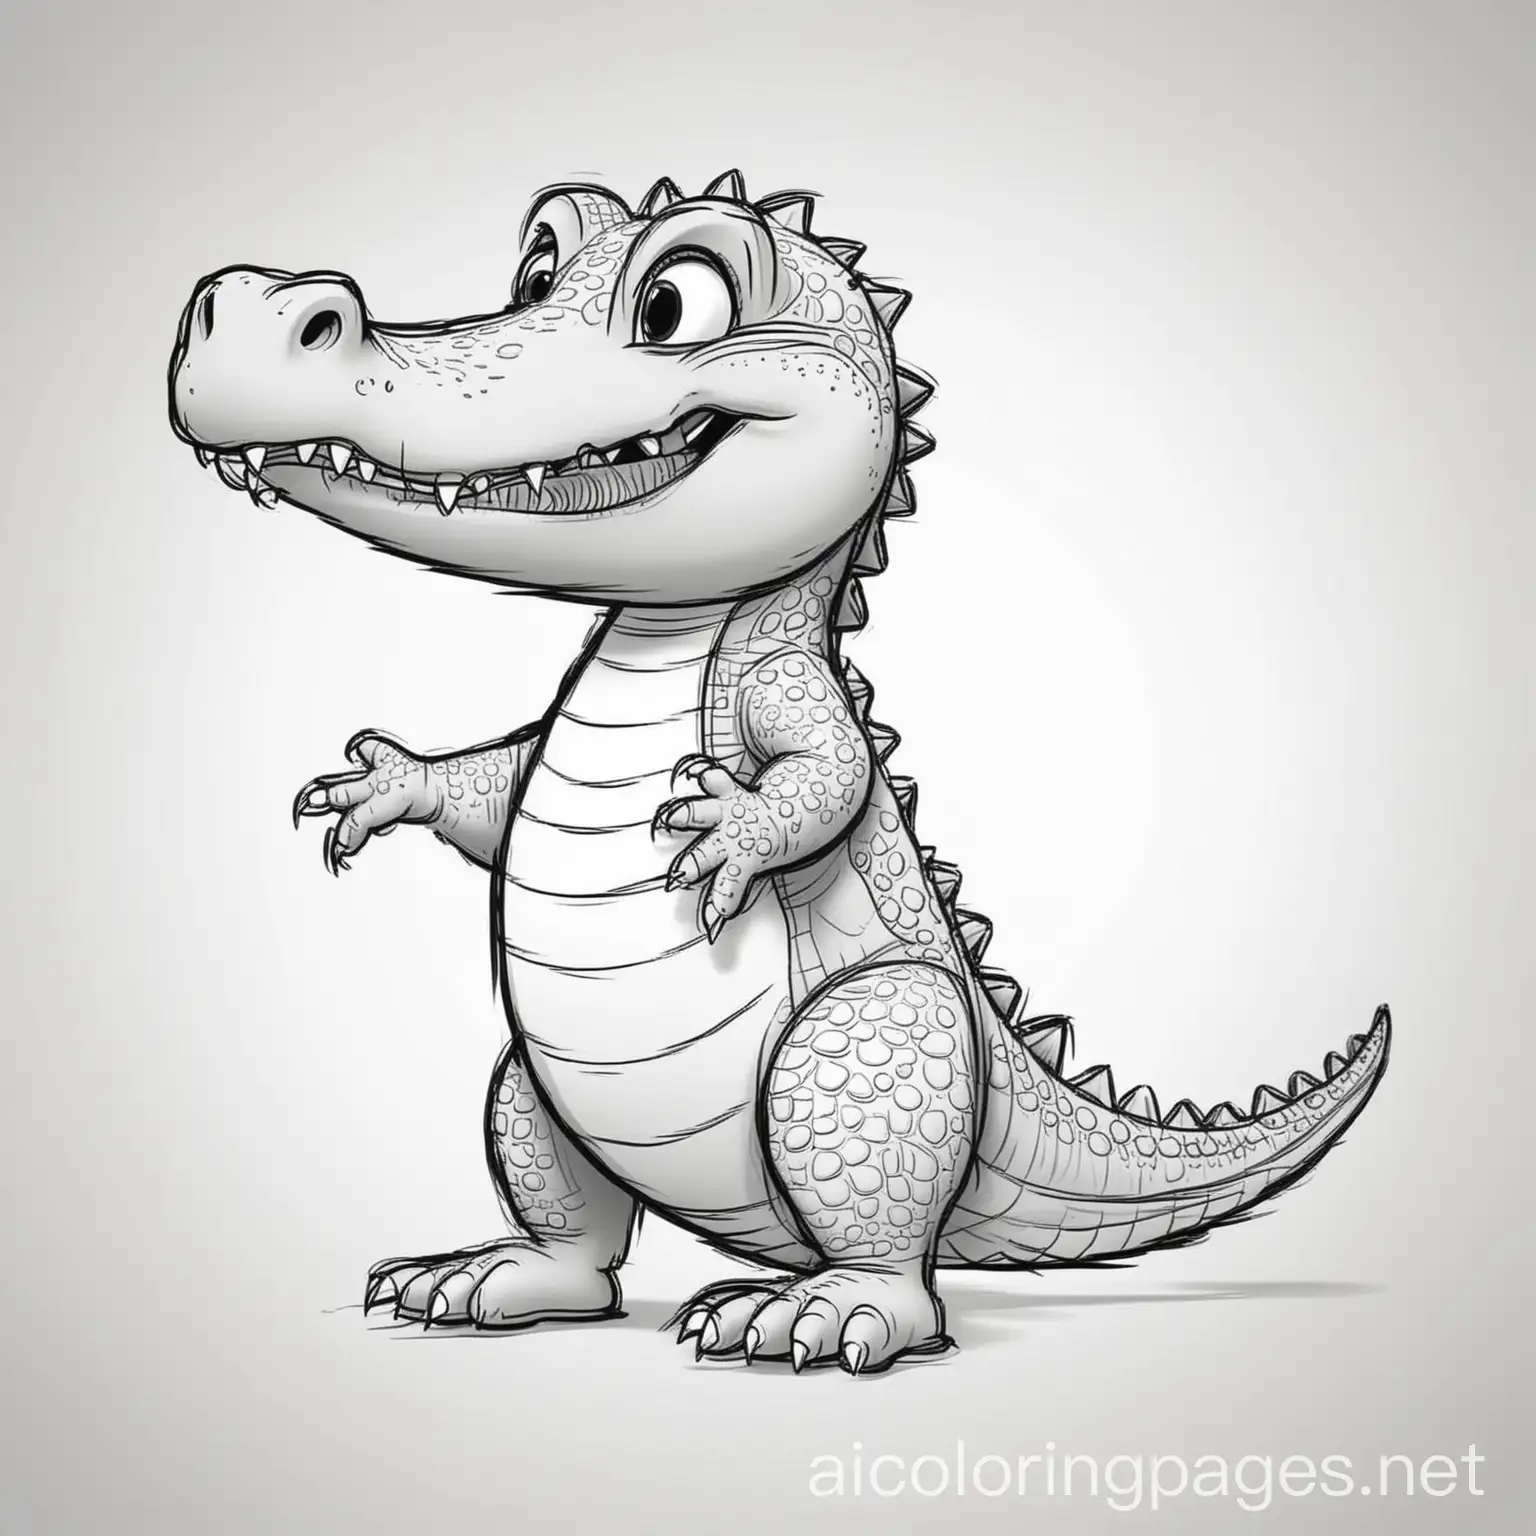 Simple-Alligator-Cartoon-Coloring-Page-for-Kids